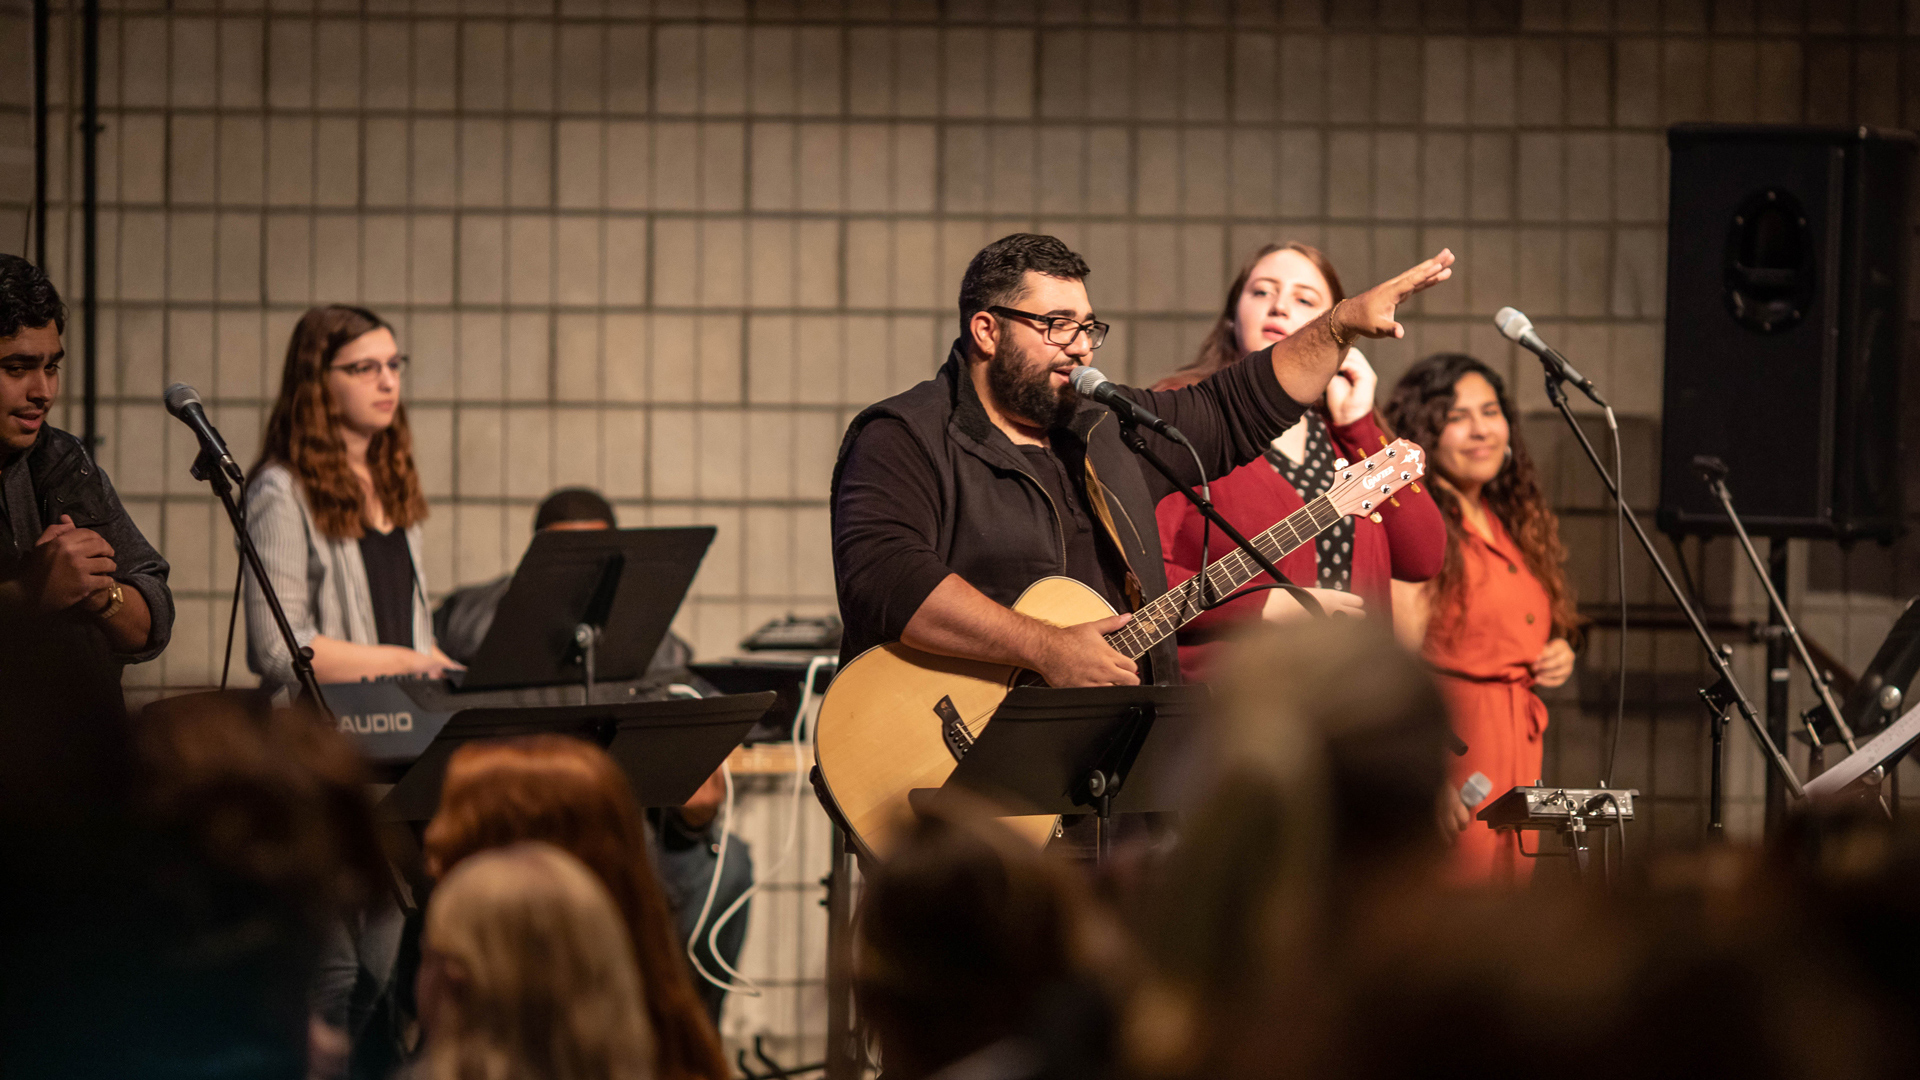 Grace students serving the campus by leading people in worship during a Chapel service.